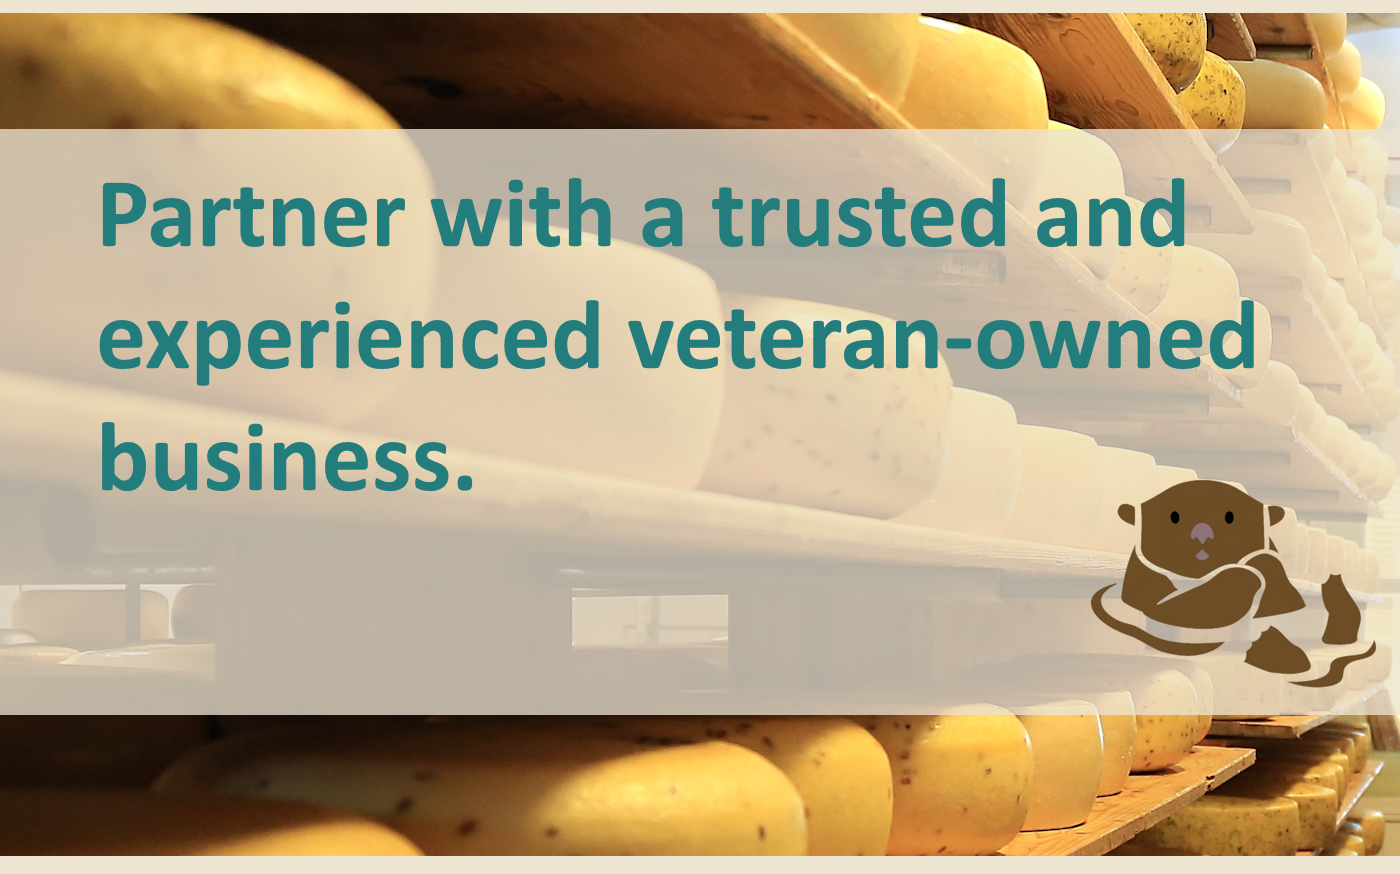 Otter Foods is a veteran-owned business